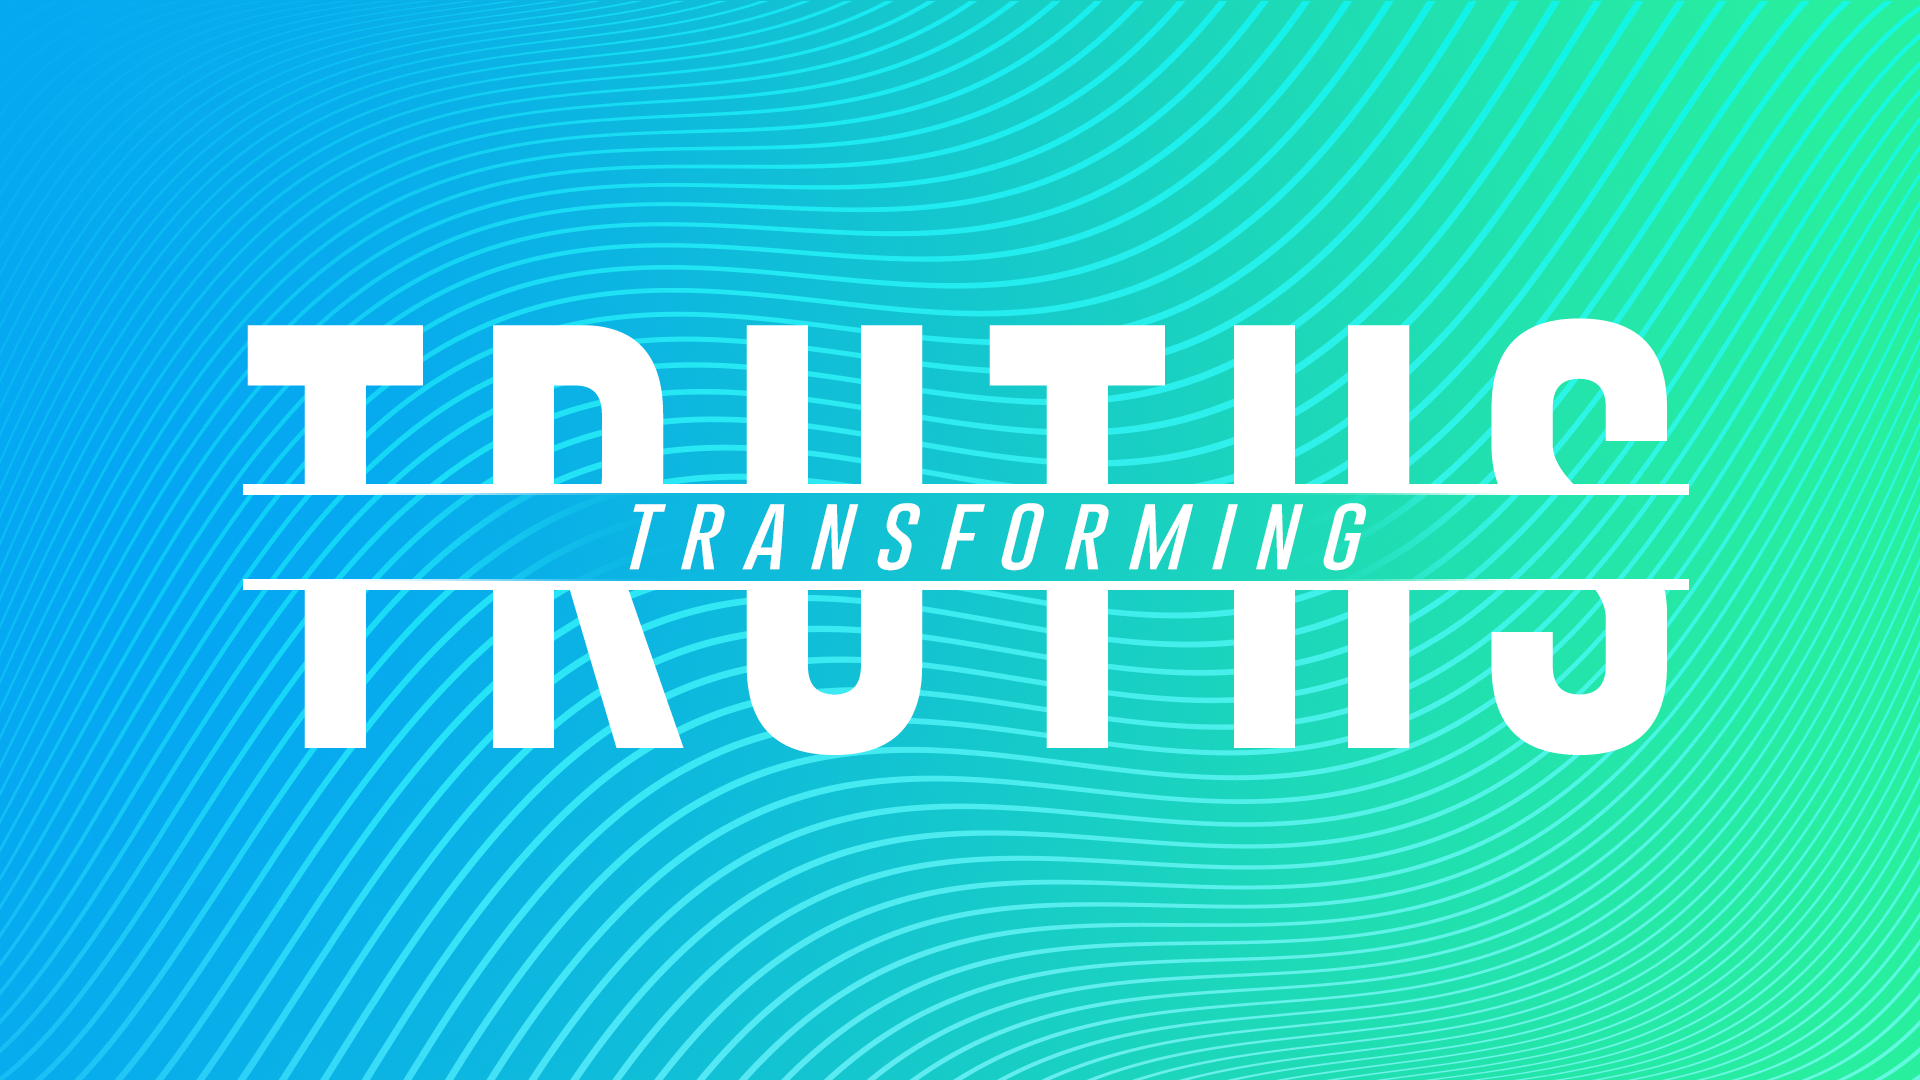 July 12, 2020 – Transforming Truths